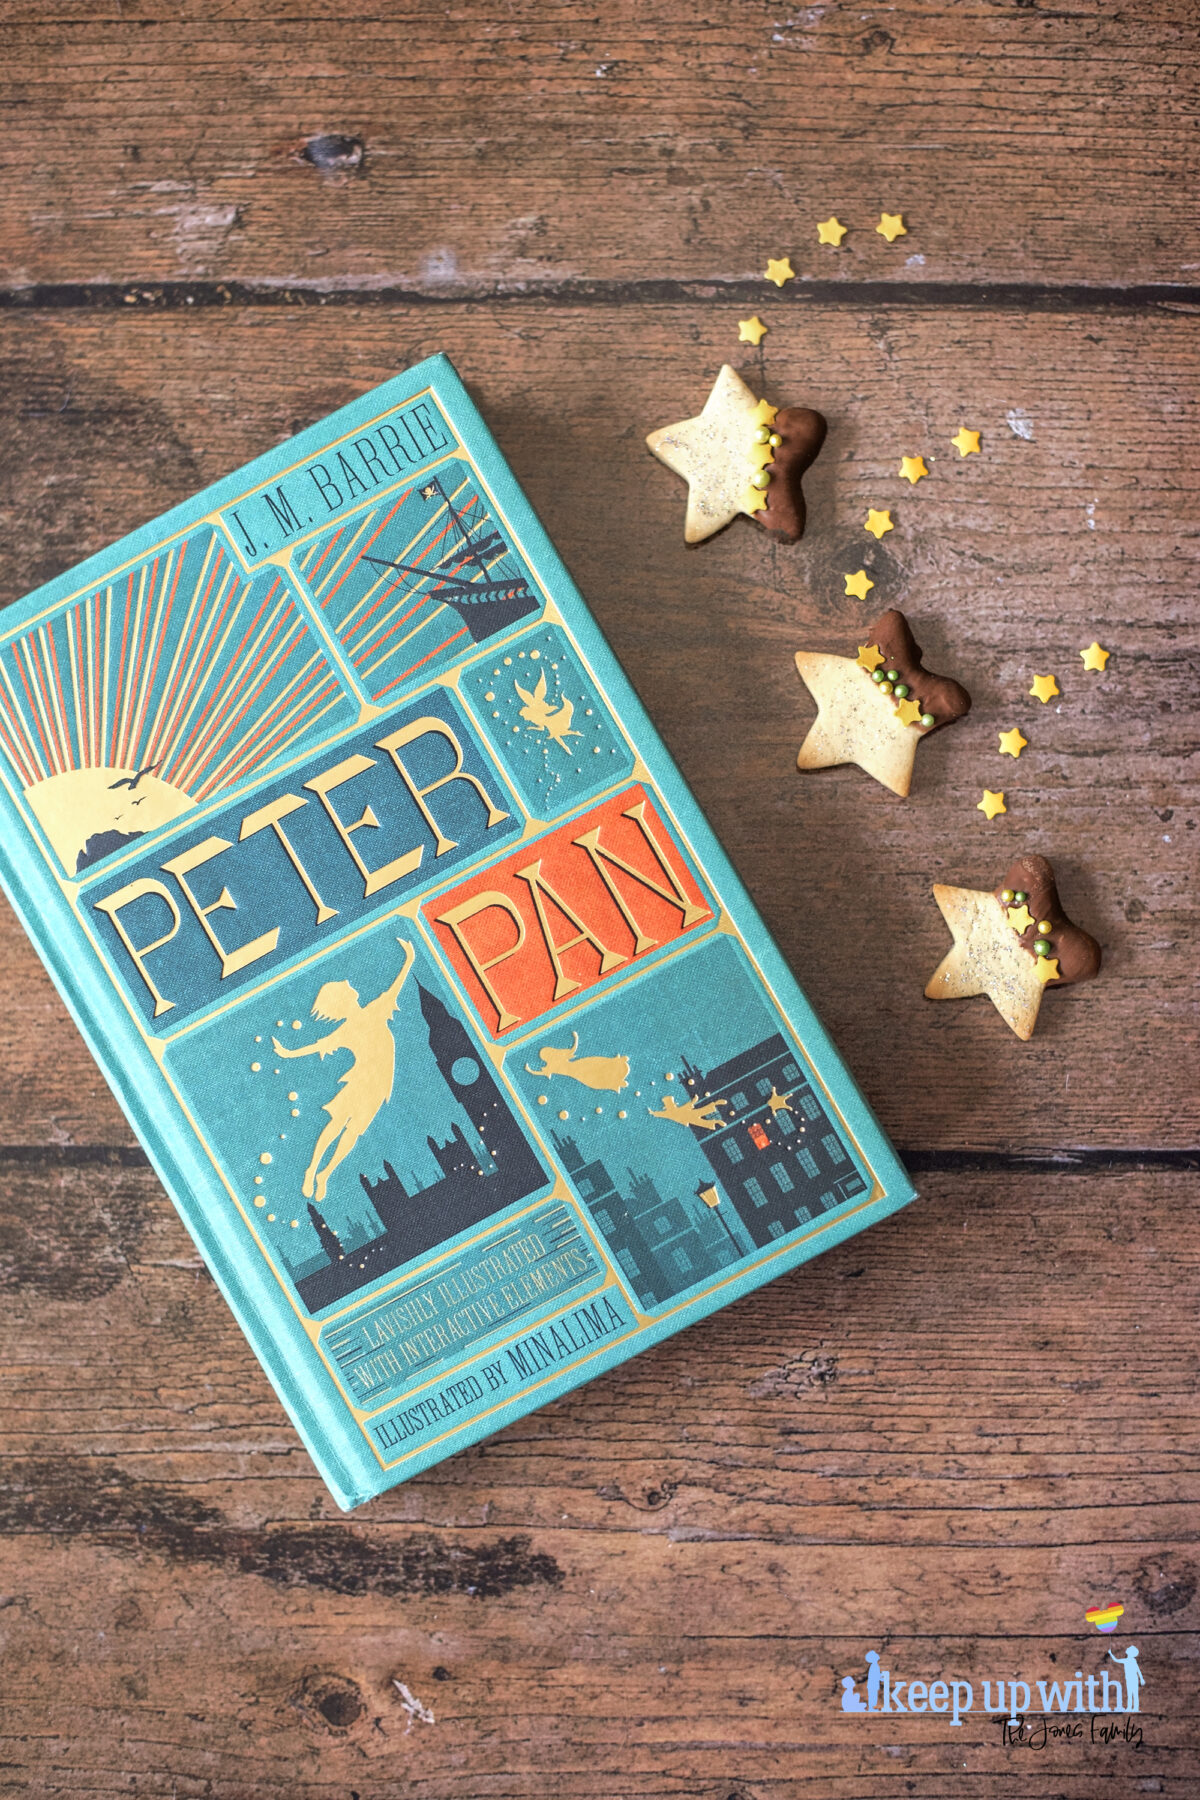 Image shows a wooden tabletop with a copy of J M Barrie's Peter Pan. On the book pages and the table are small star shaped biscuits. Half of each biscuit is dipped in chocolate and  the other is sprinkled with silver edible glitter.  The dividing line is decorated with yellow star sprinkles and green pearl shaped sprinkles. Image by Keep Up With The Jones Family